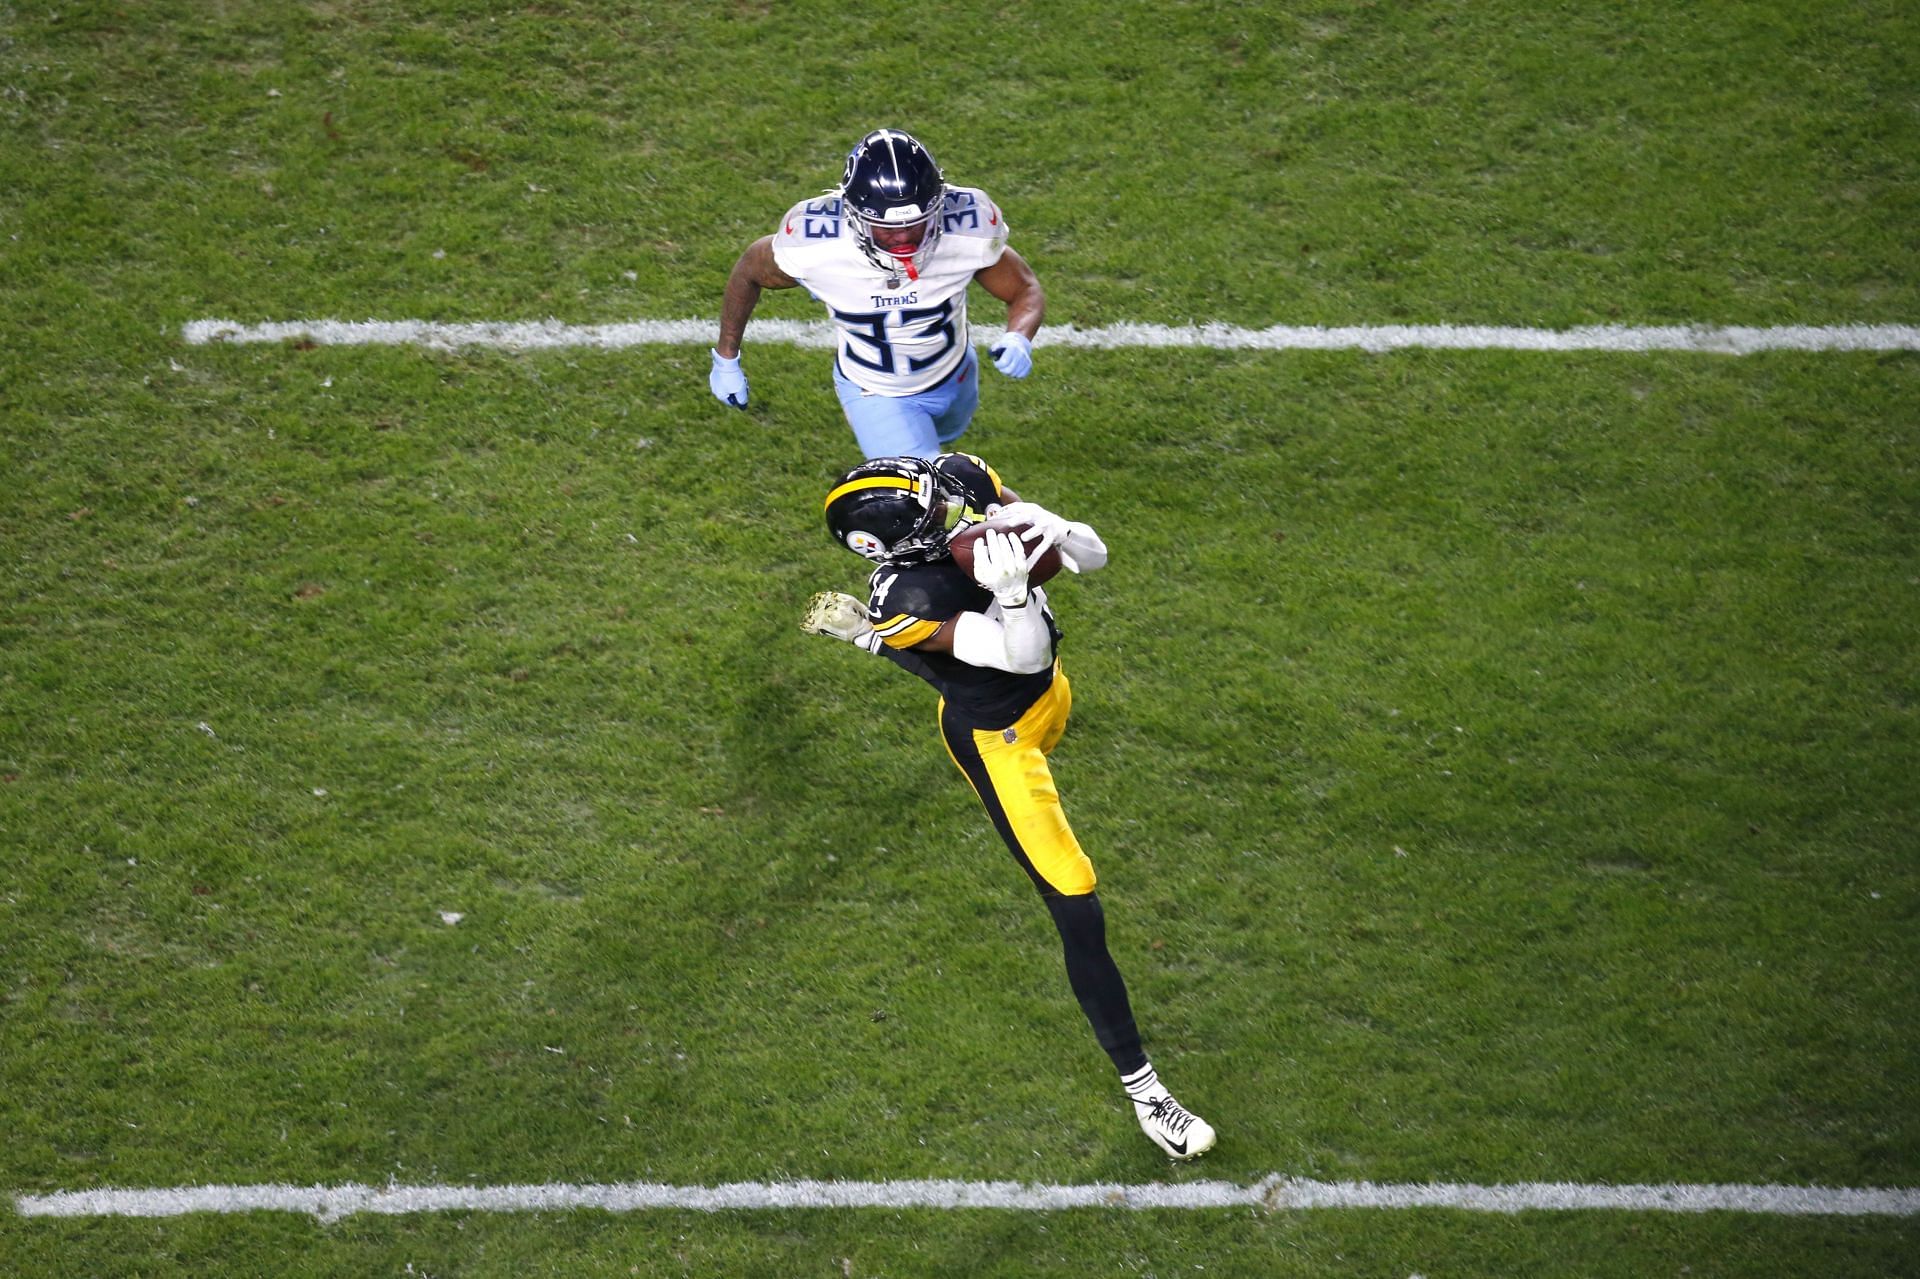 Tennessee Titans v Pittsburgh Steelers